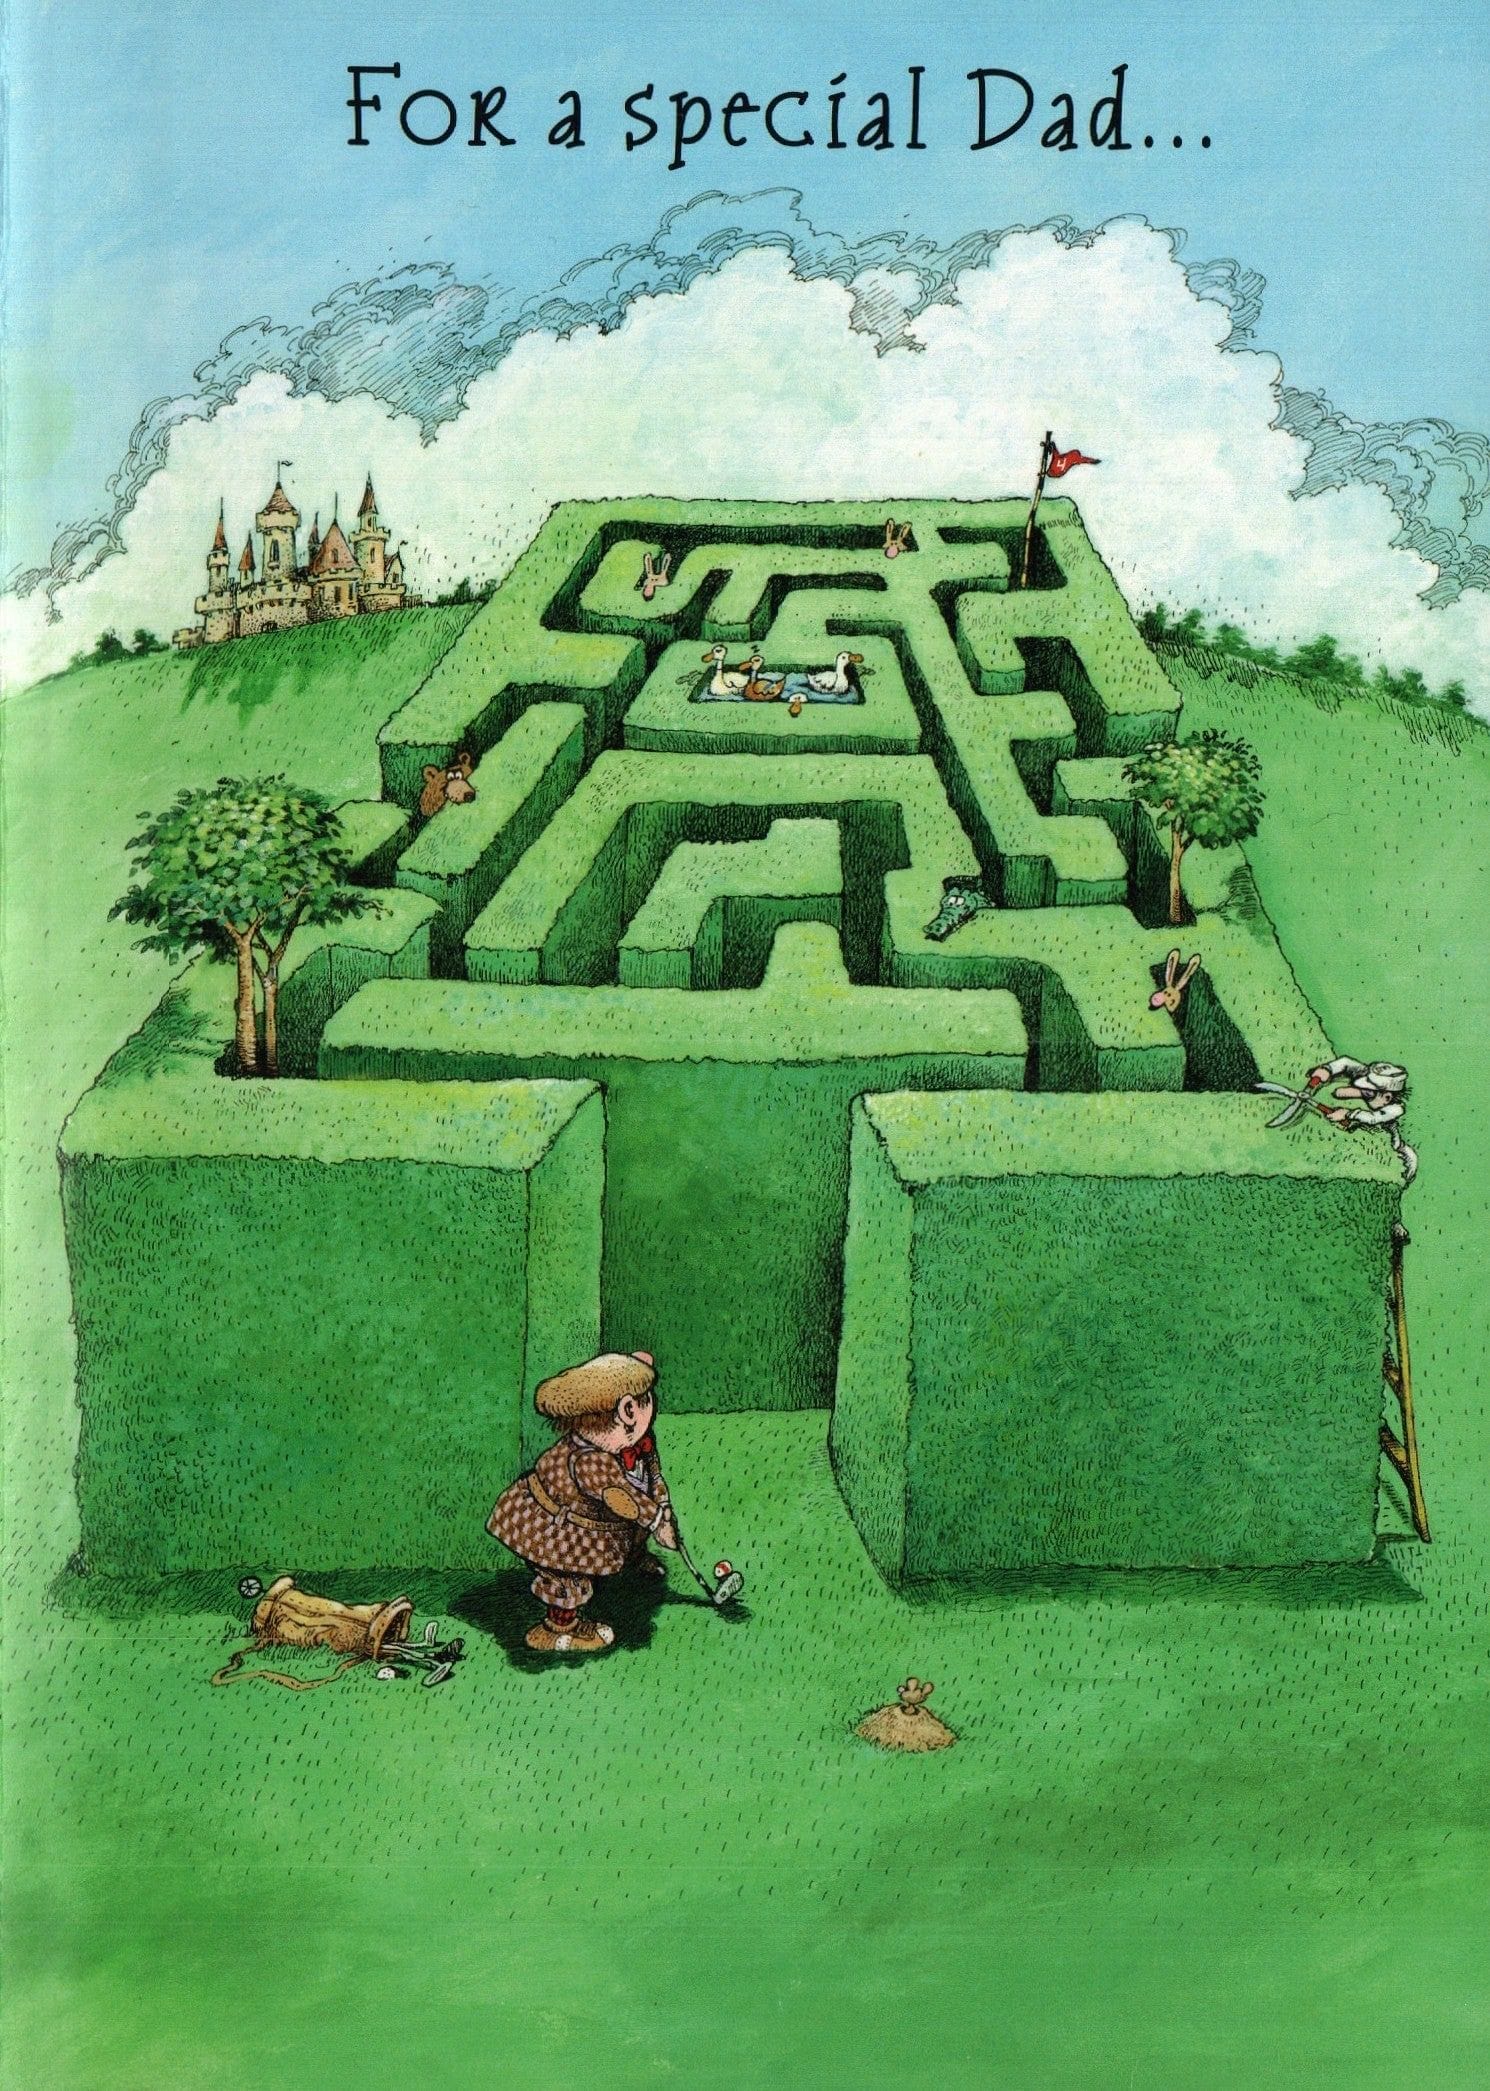 a-MAZE-ing Fathers Day Card - Shelburne Country Store